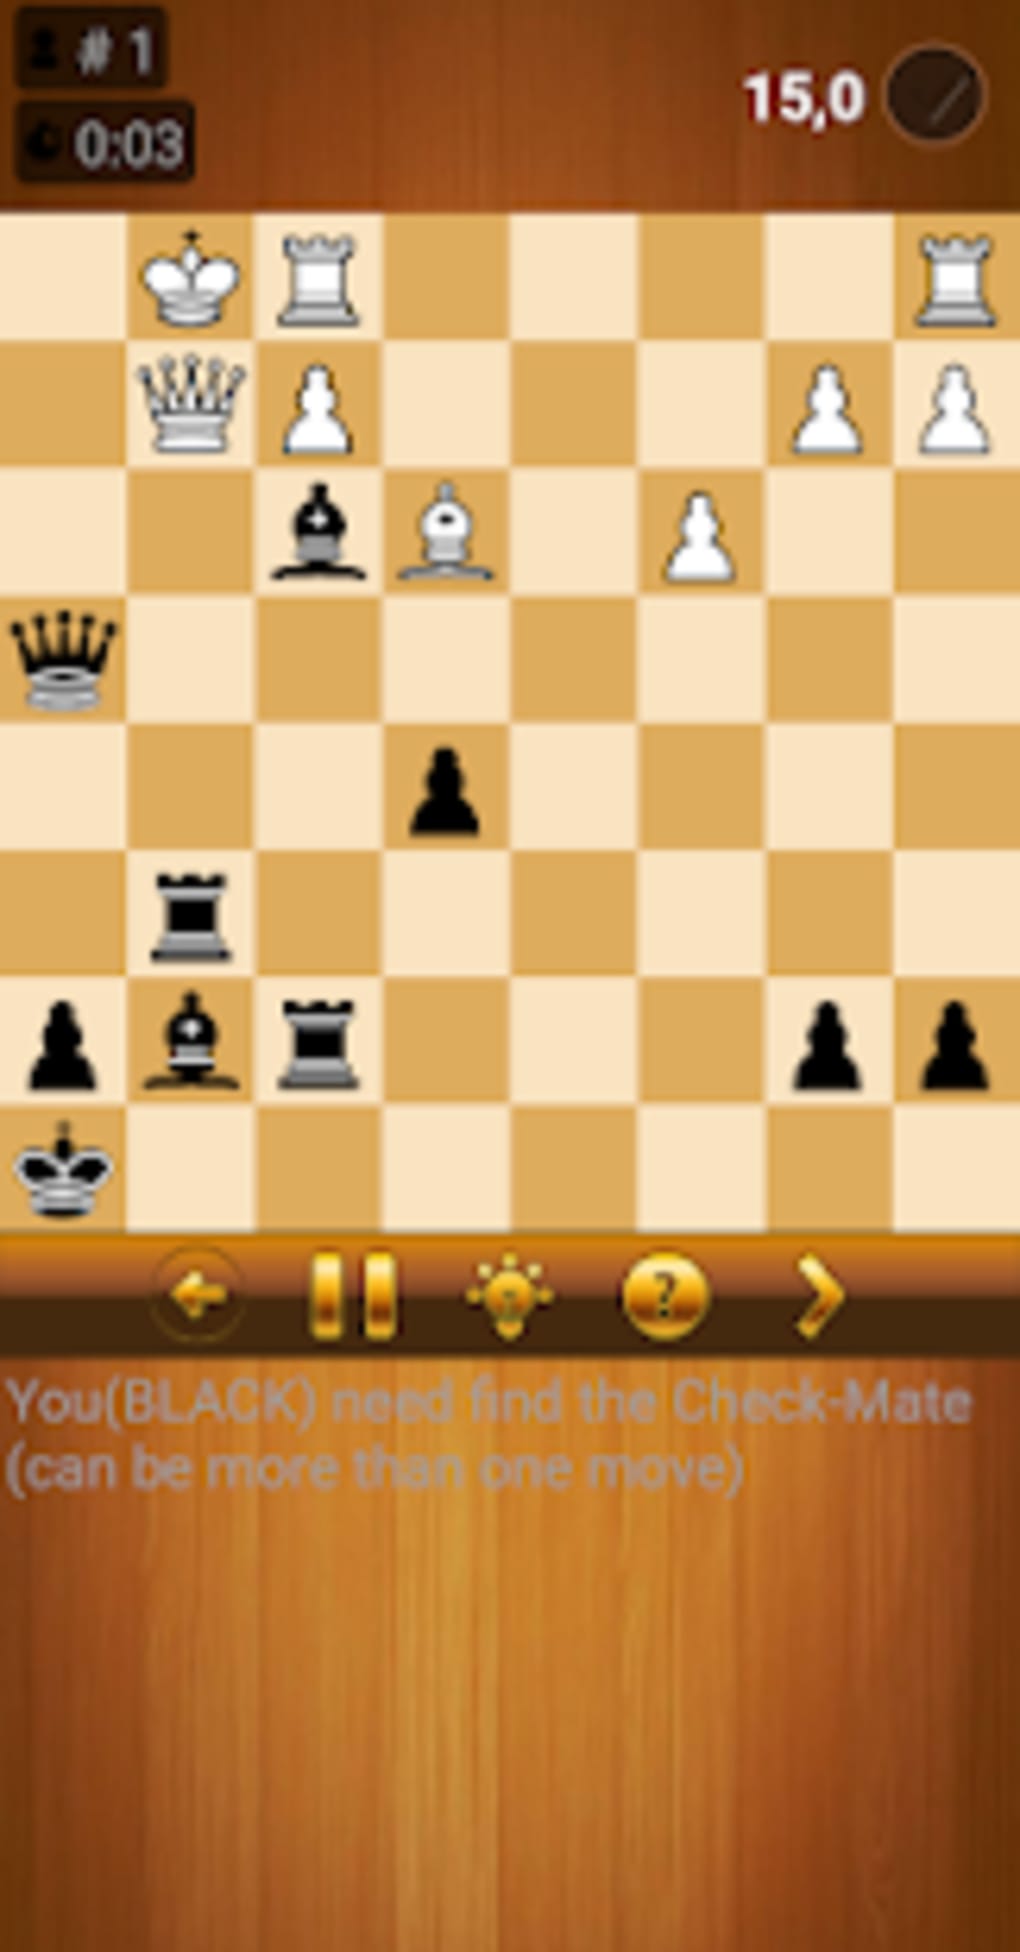 Reverse Chess APK for Android Download